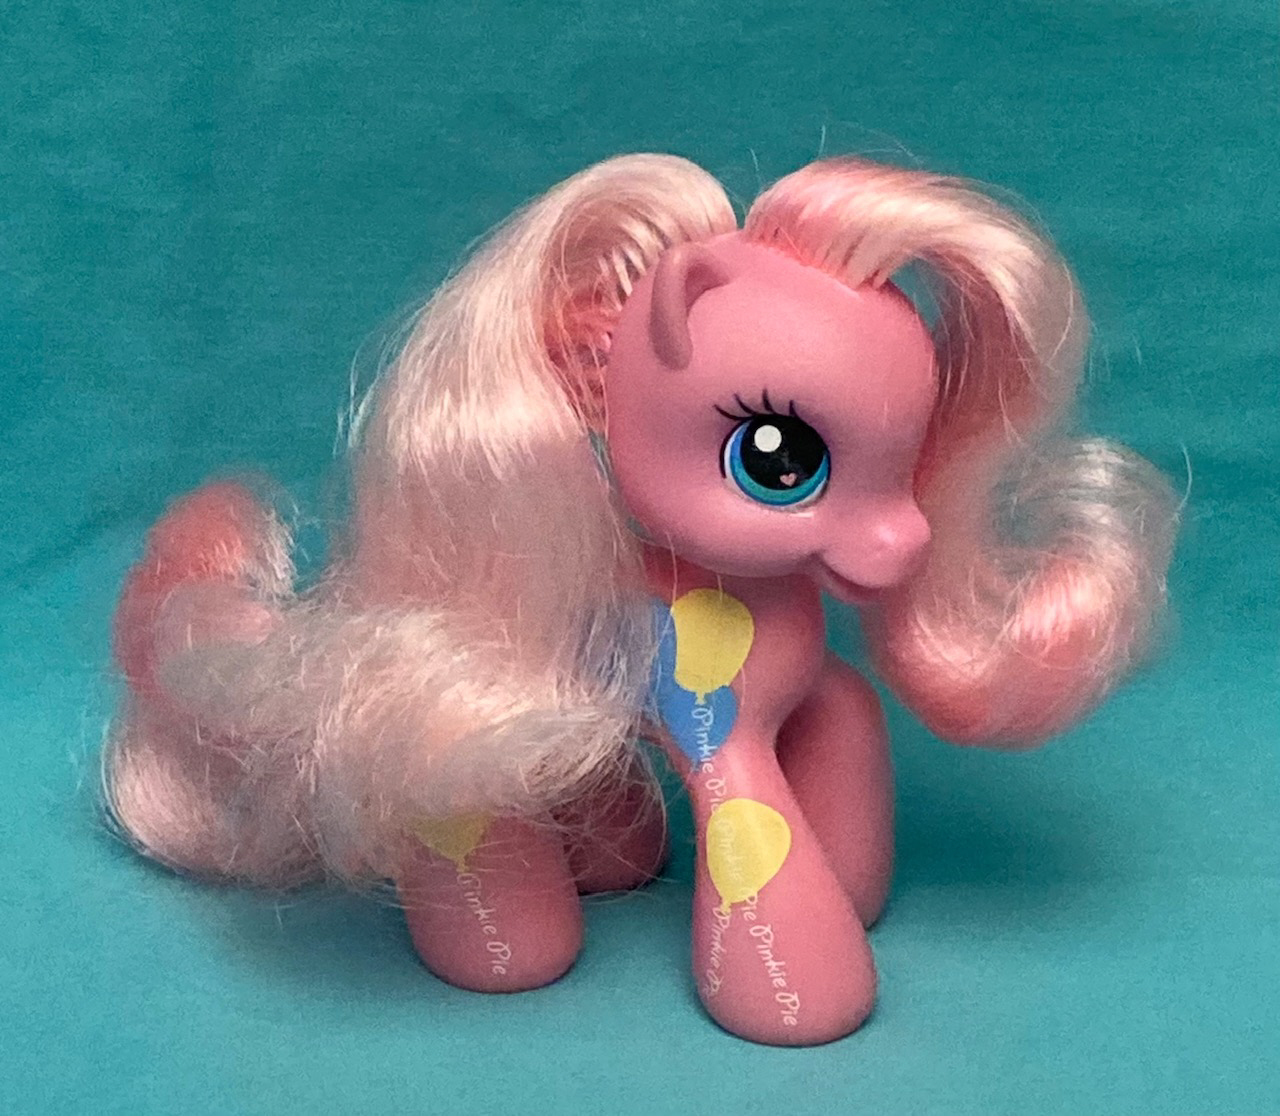 Primary image for My Little Pony Pinkie Pie toy figure Twice As Fancy balloons G3.5 Hasbro 2008